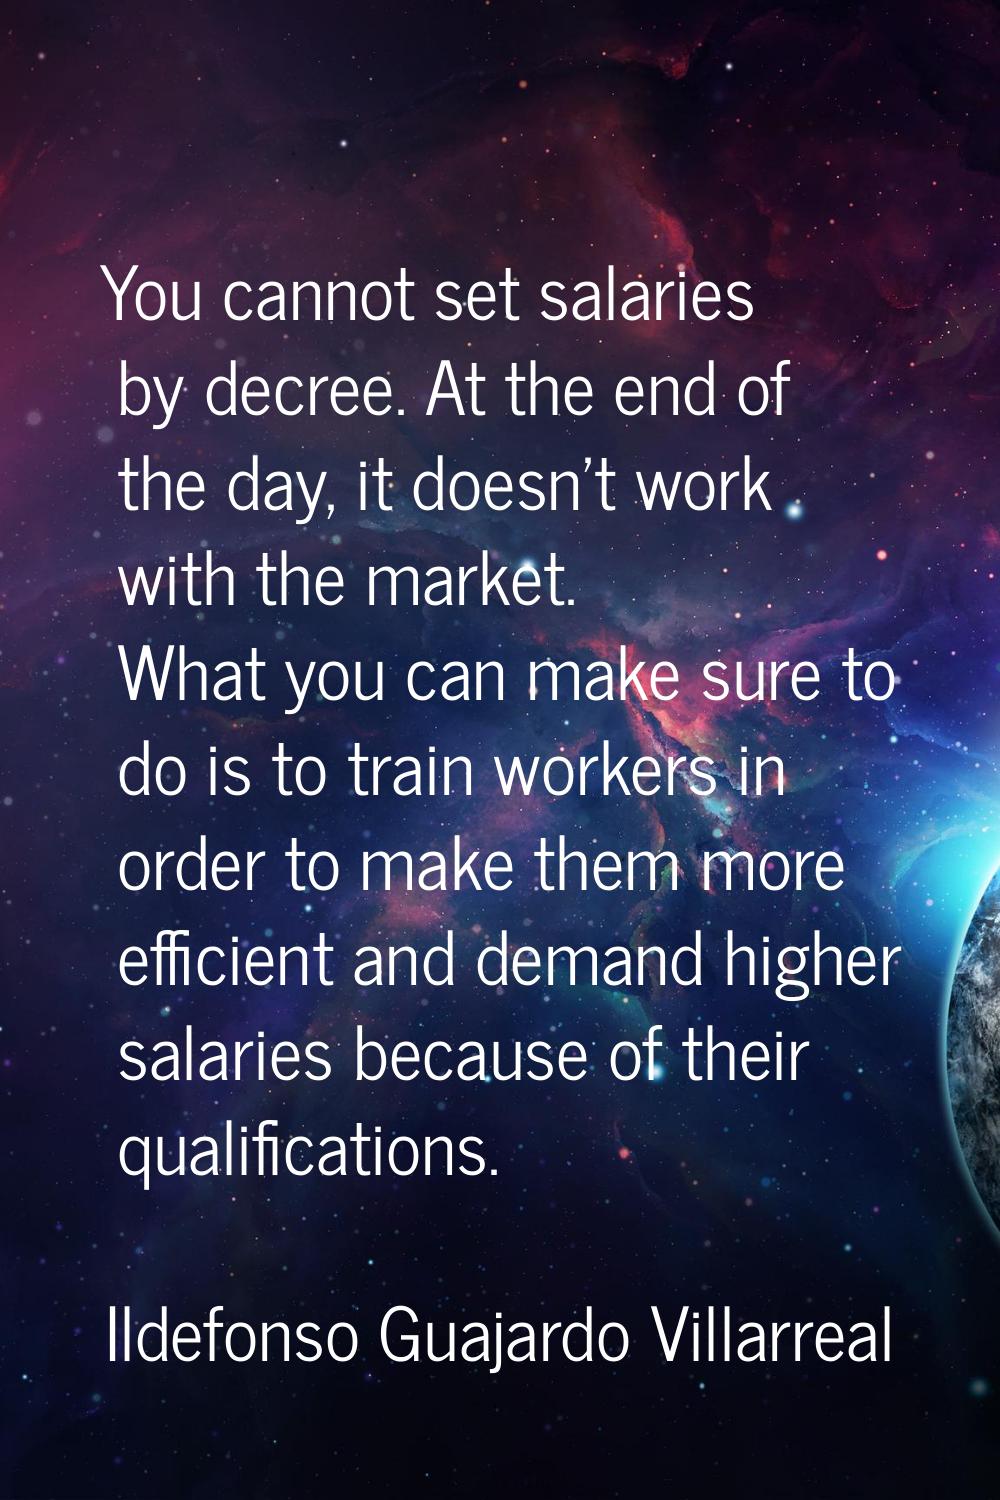 You cannot set salaries by decree. At the end of the day, it doesn't work with the market. What you